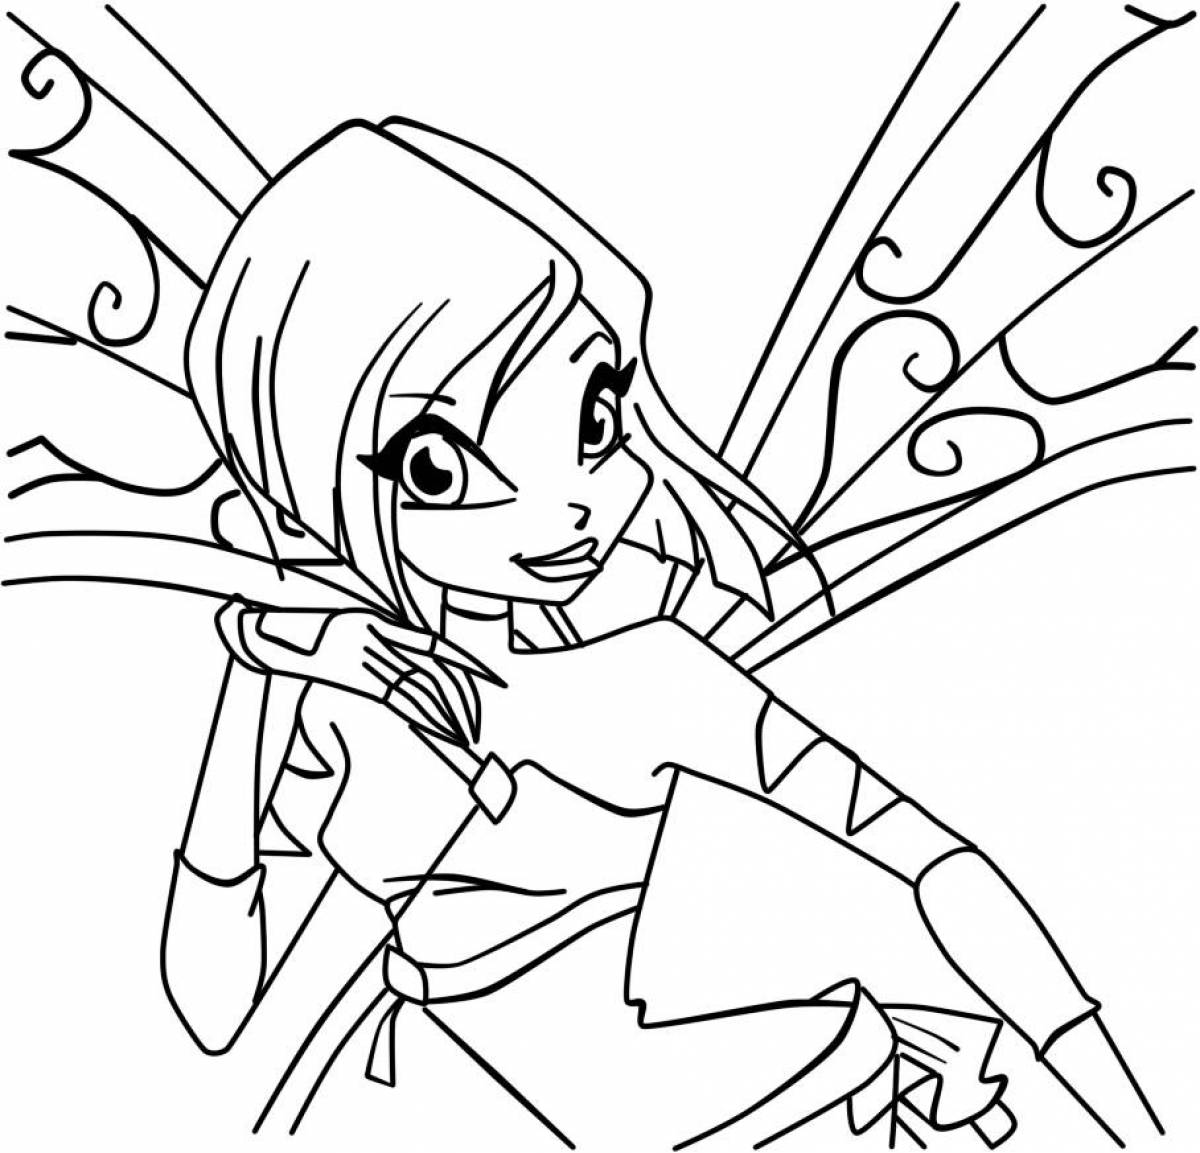 Superb winx club coloring page